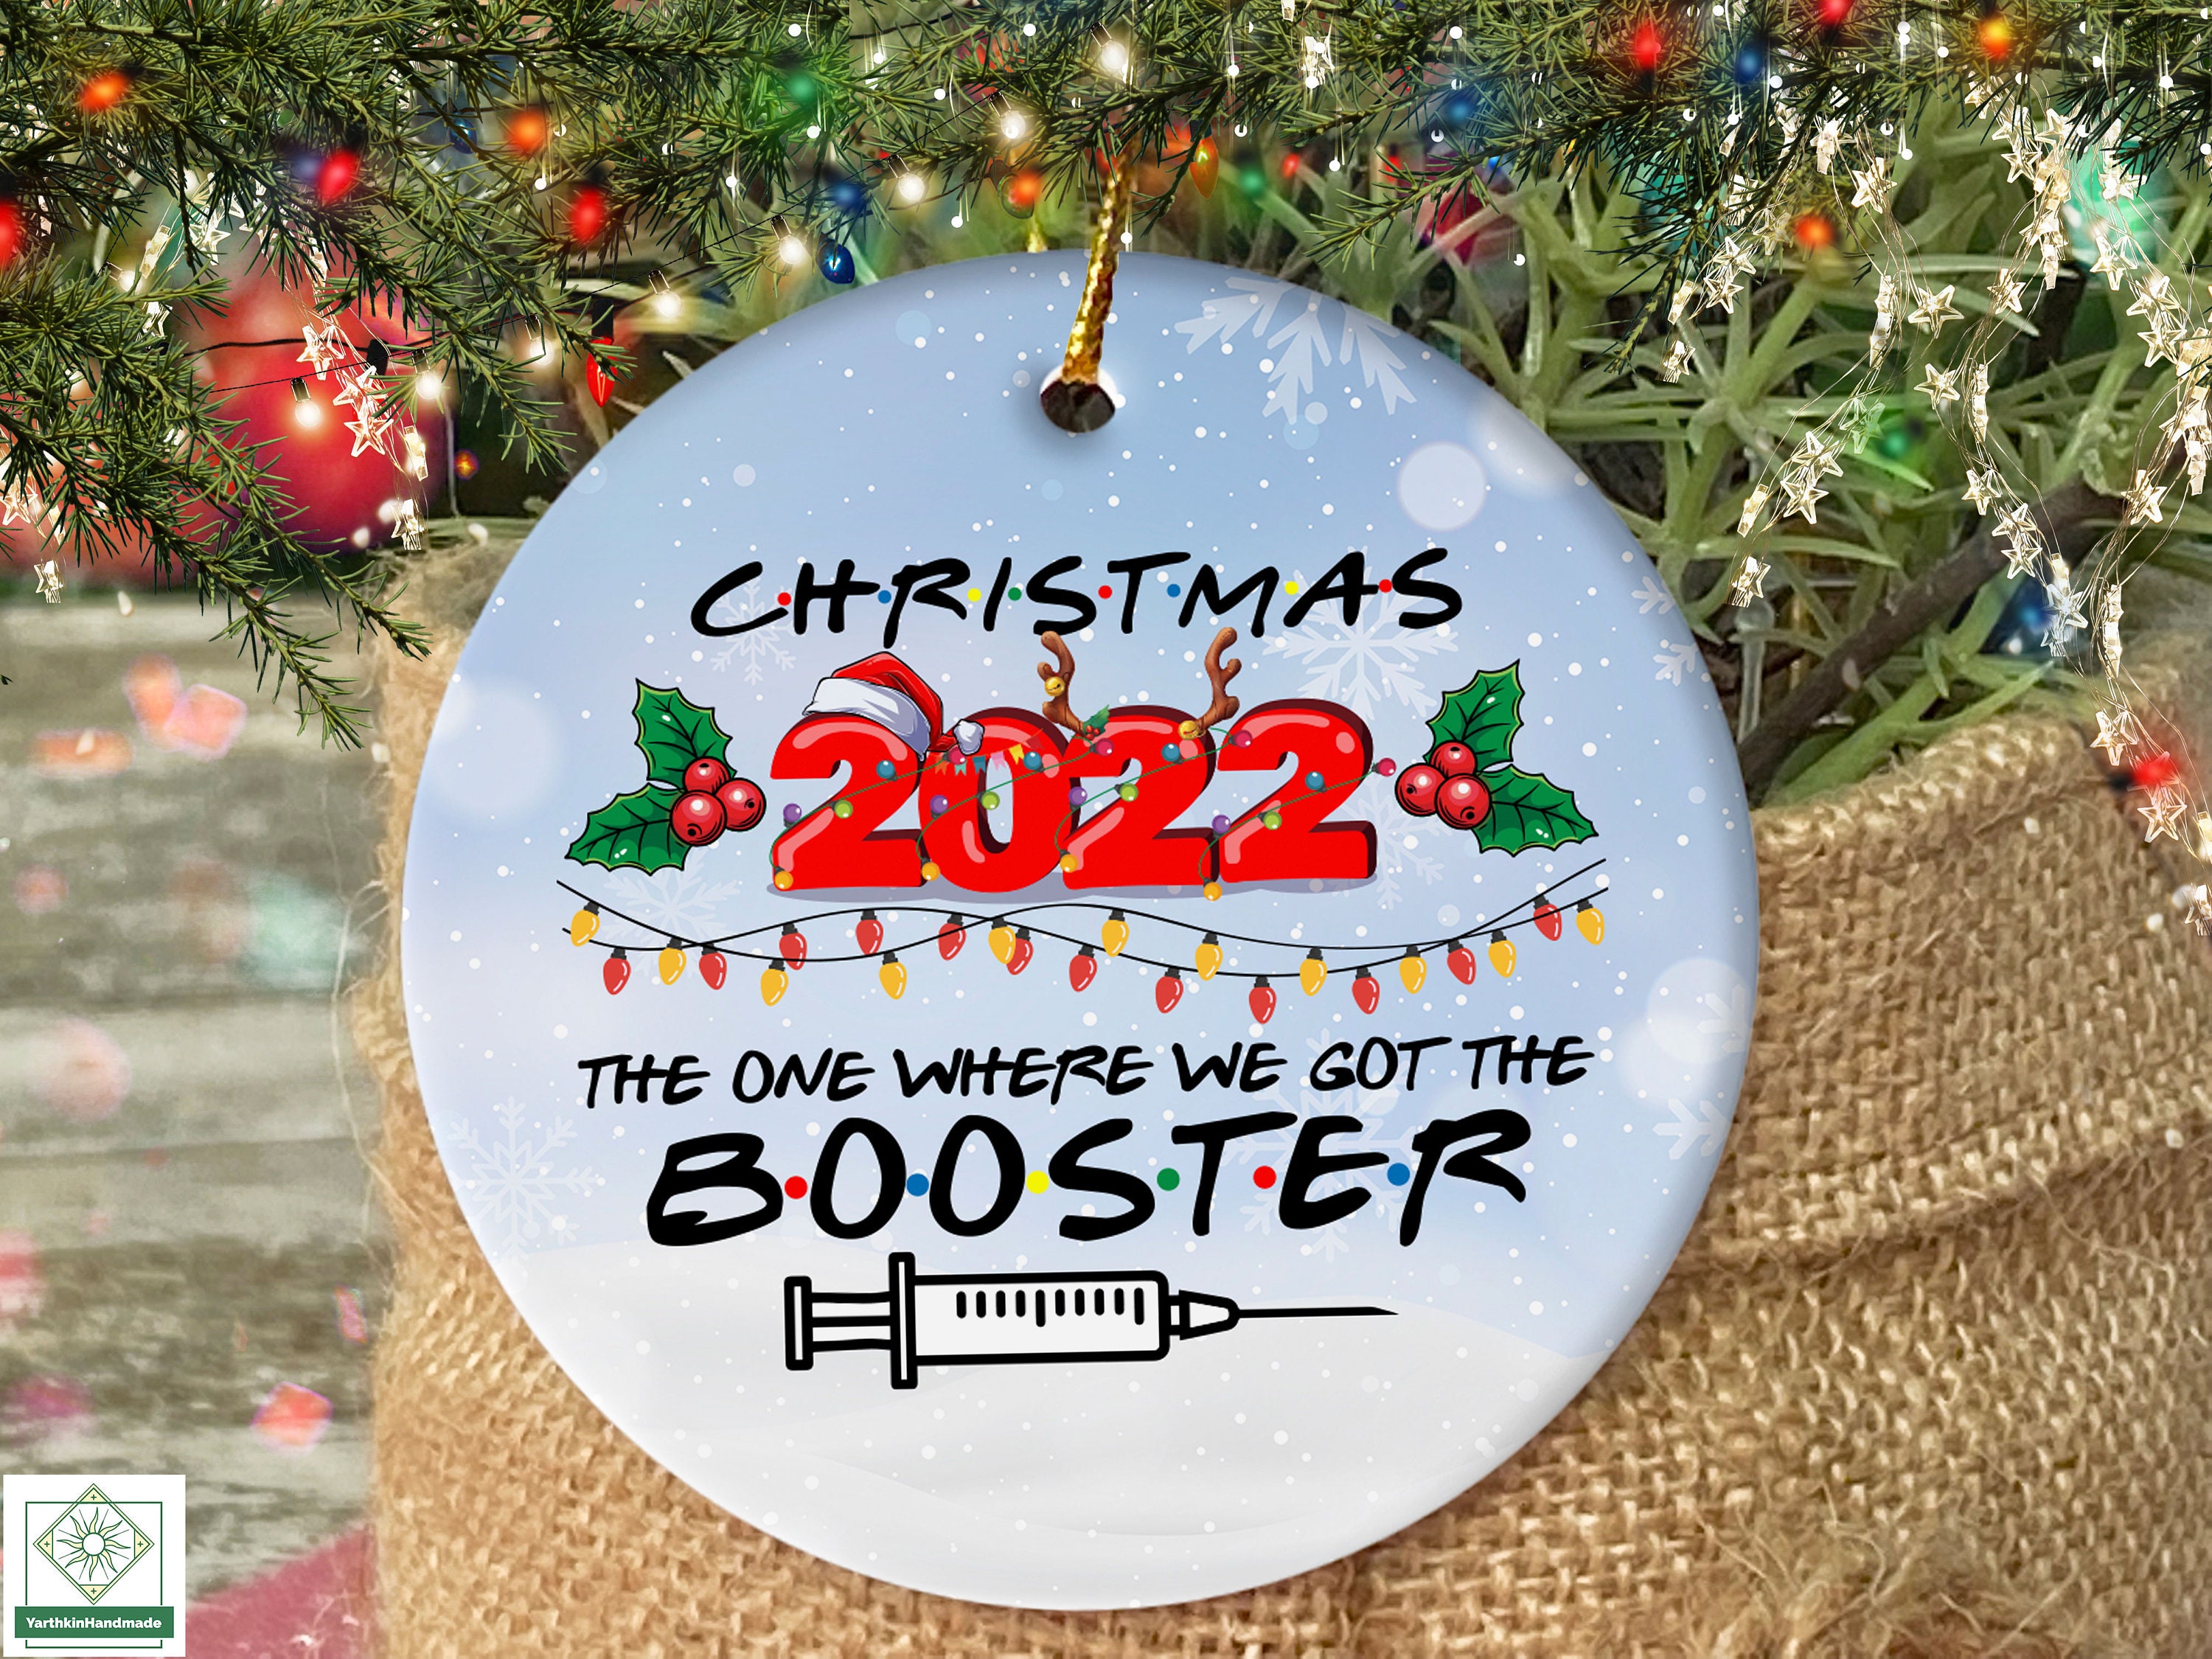 2022 Christmas Vaccine Booster Ornament, The One Where We Got The Booster